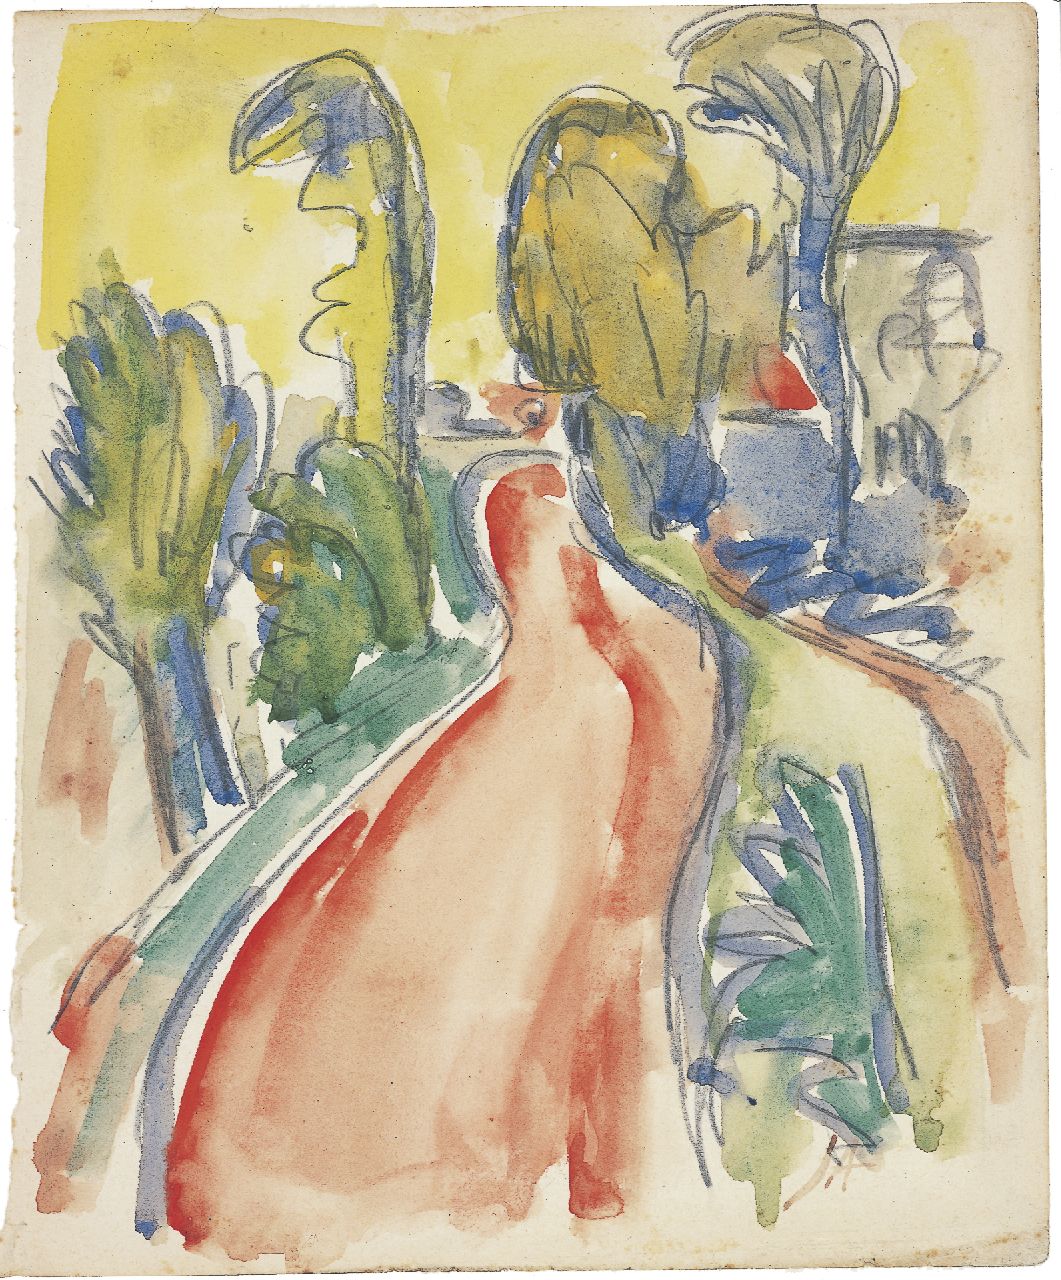 Altink J.  | Jan Altink, A red road, pencil and watercolour on paper 20.7 x 17.0 cm, signed l.r. with initials and painted between 1925-1930